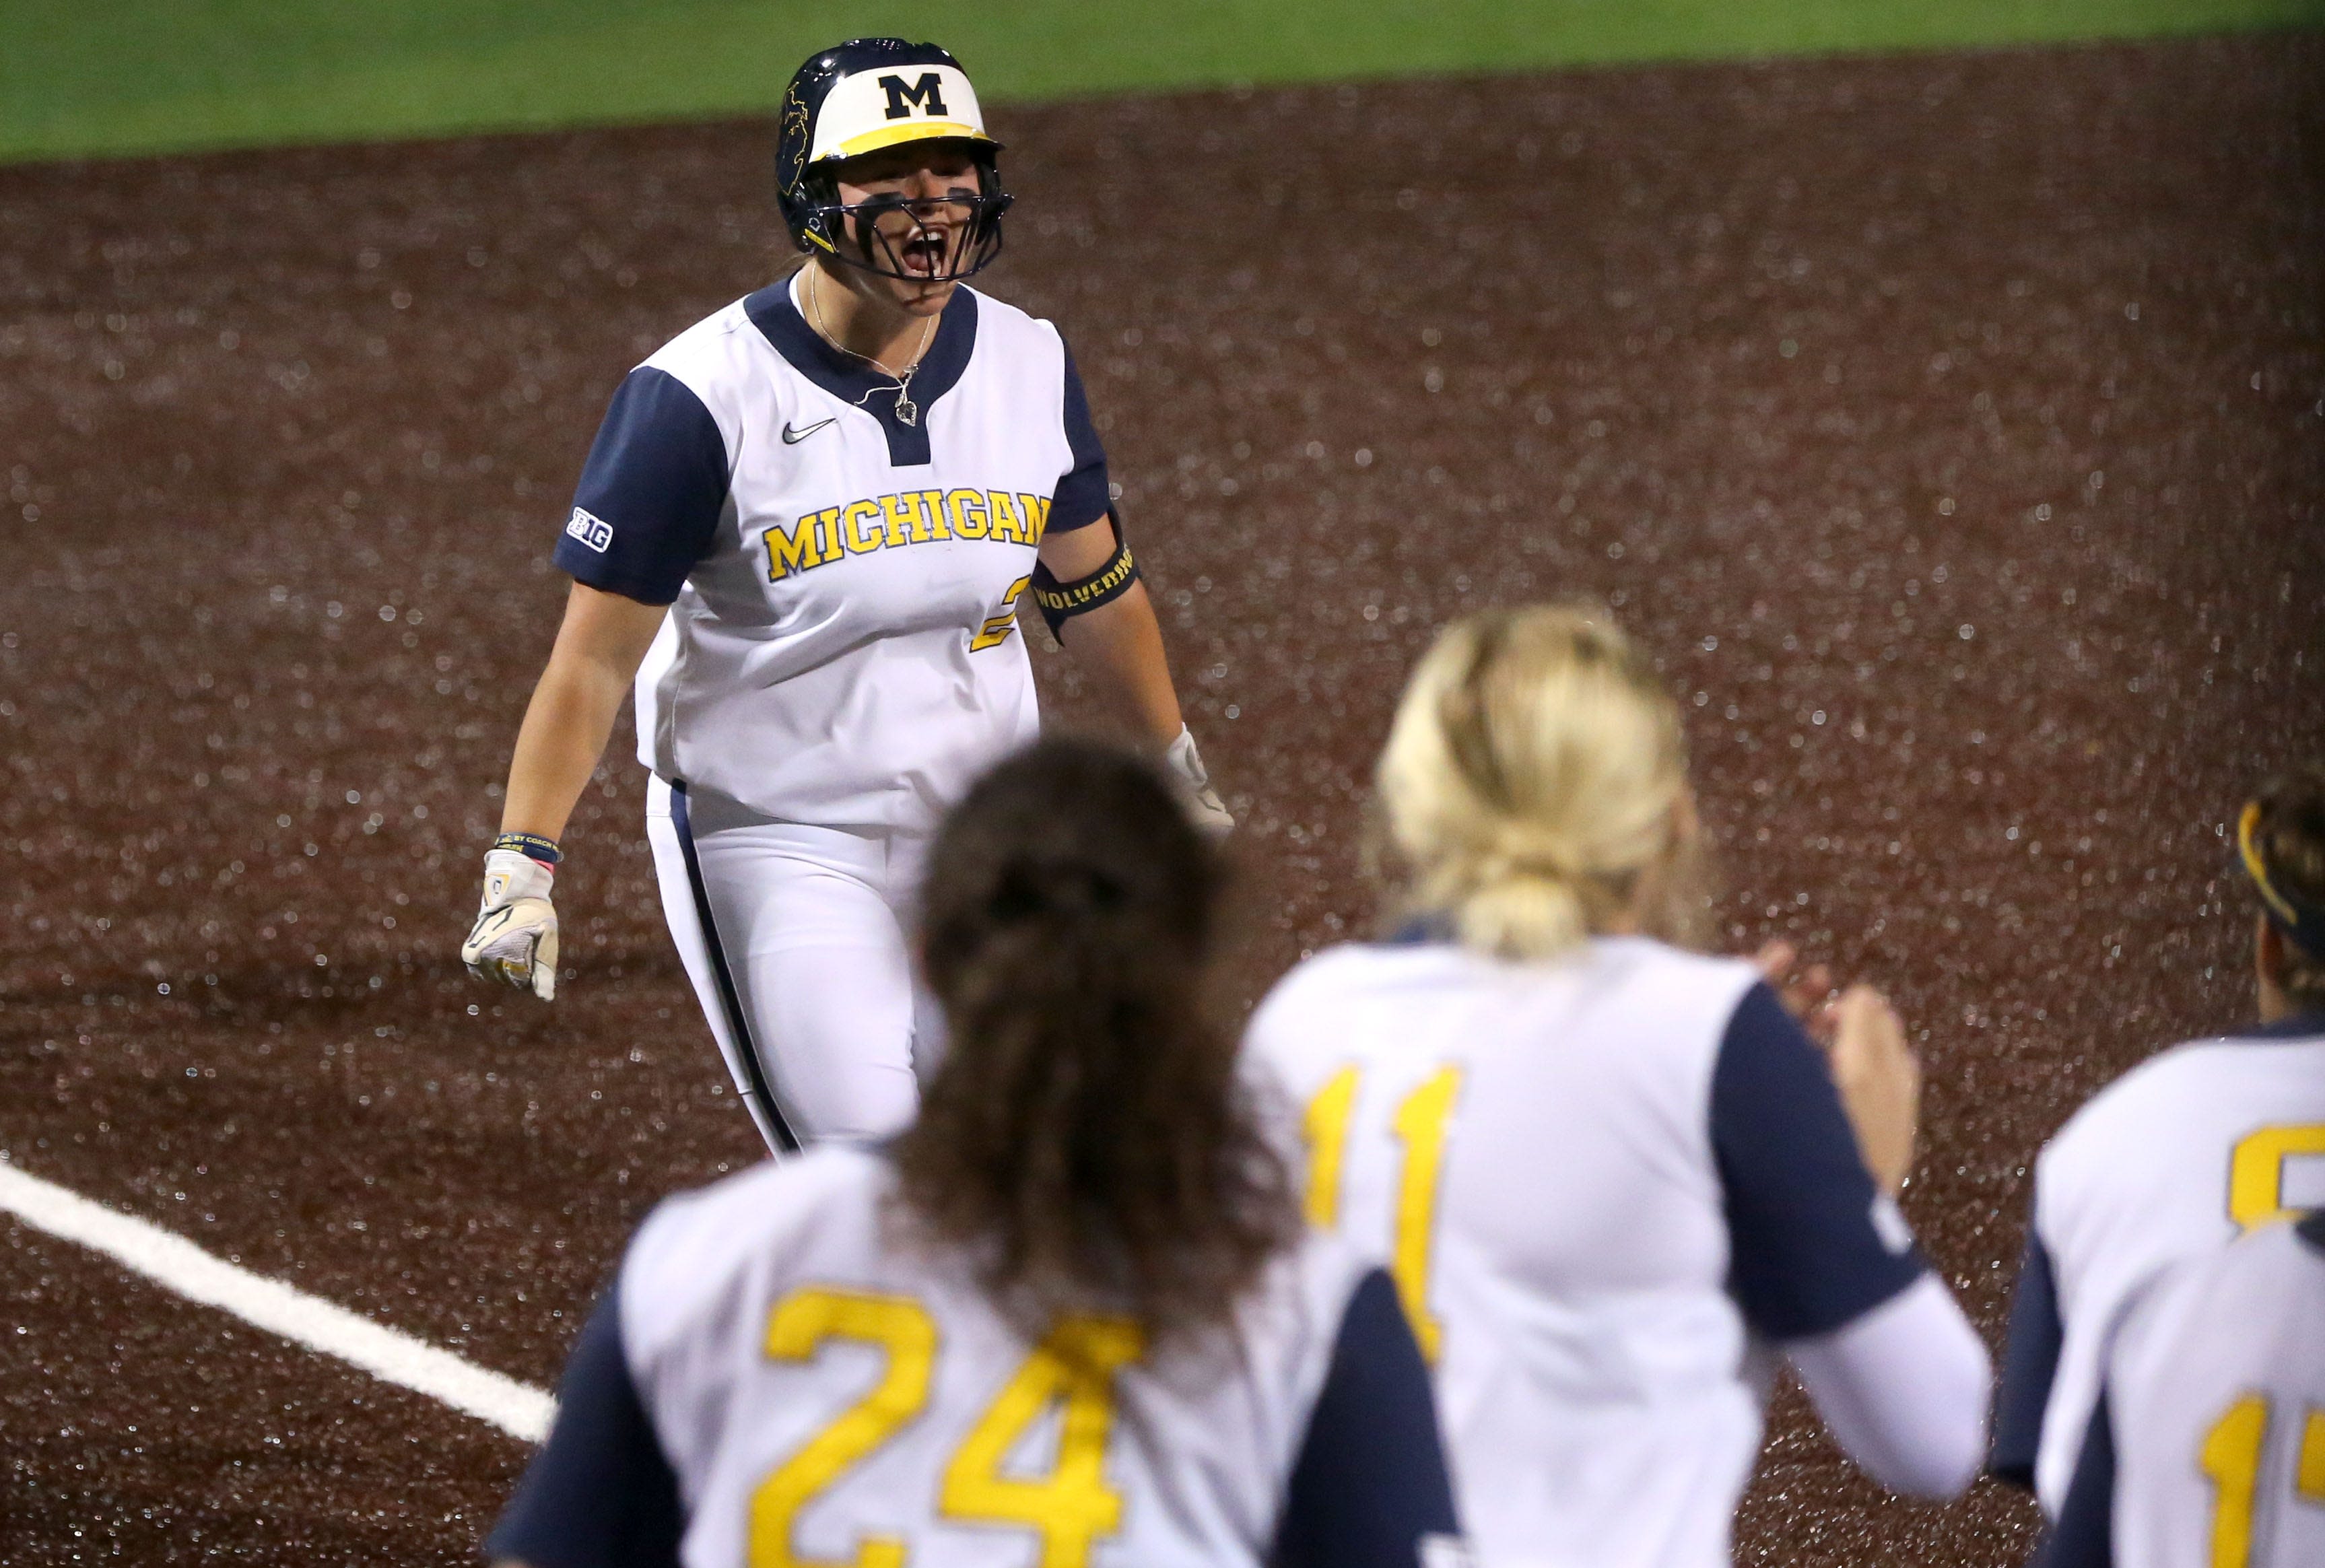 Michigan softball nabs 11th Big Ten tournament title with 3-1 win over Indiana Hoosiers